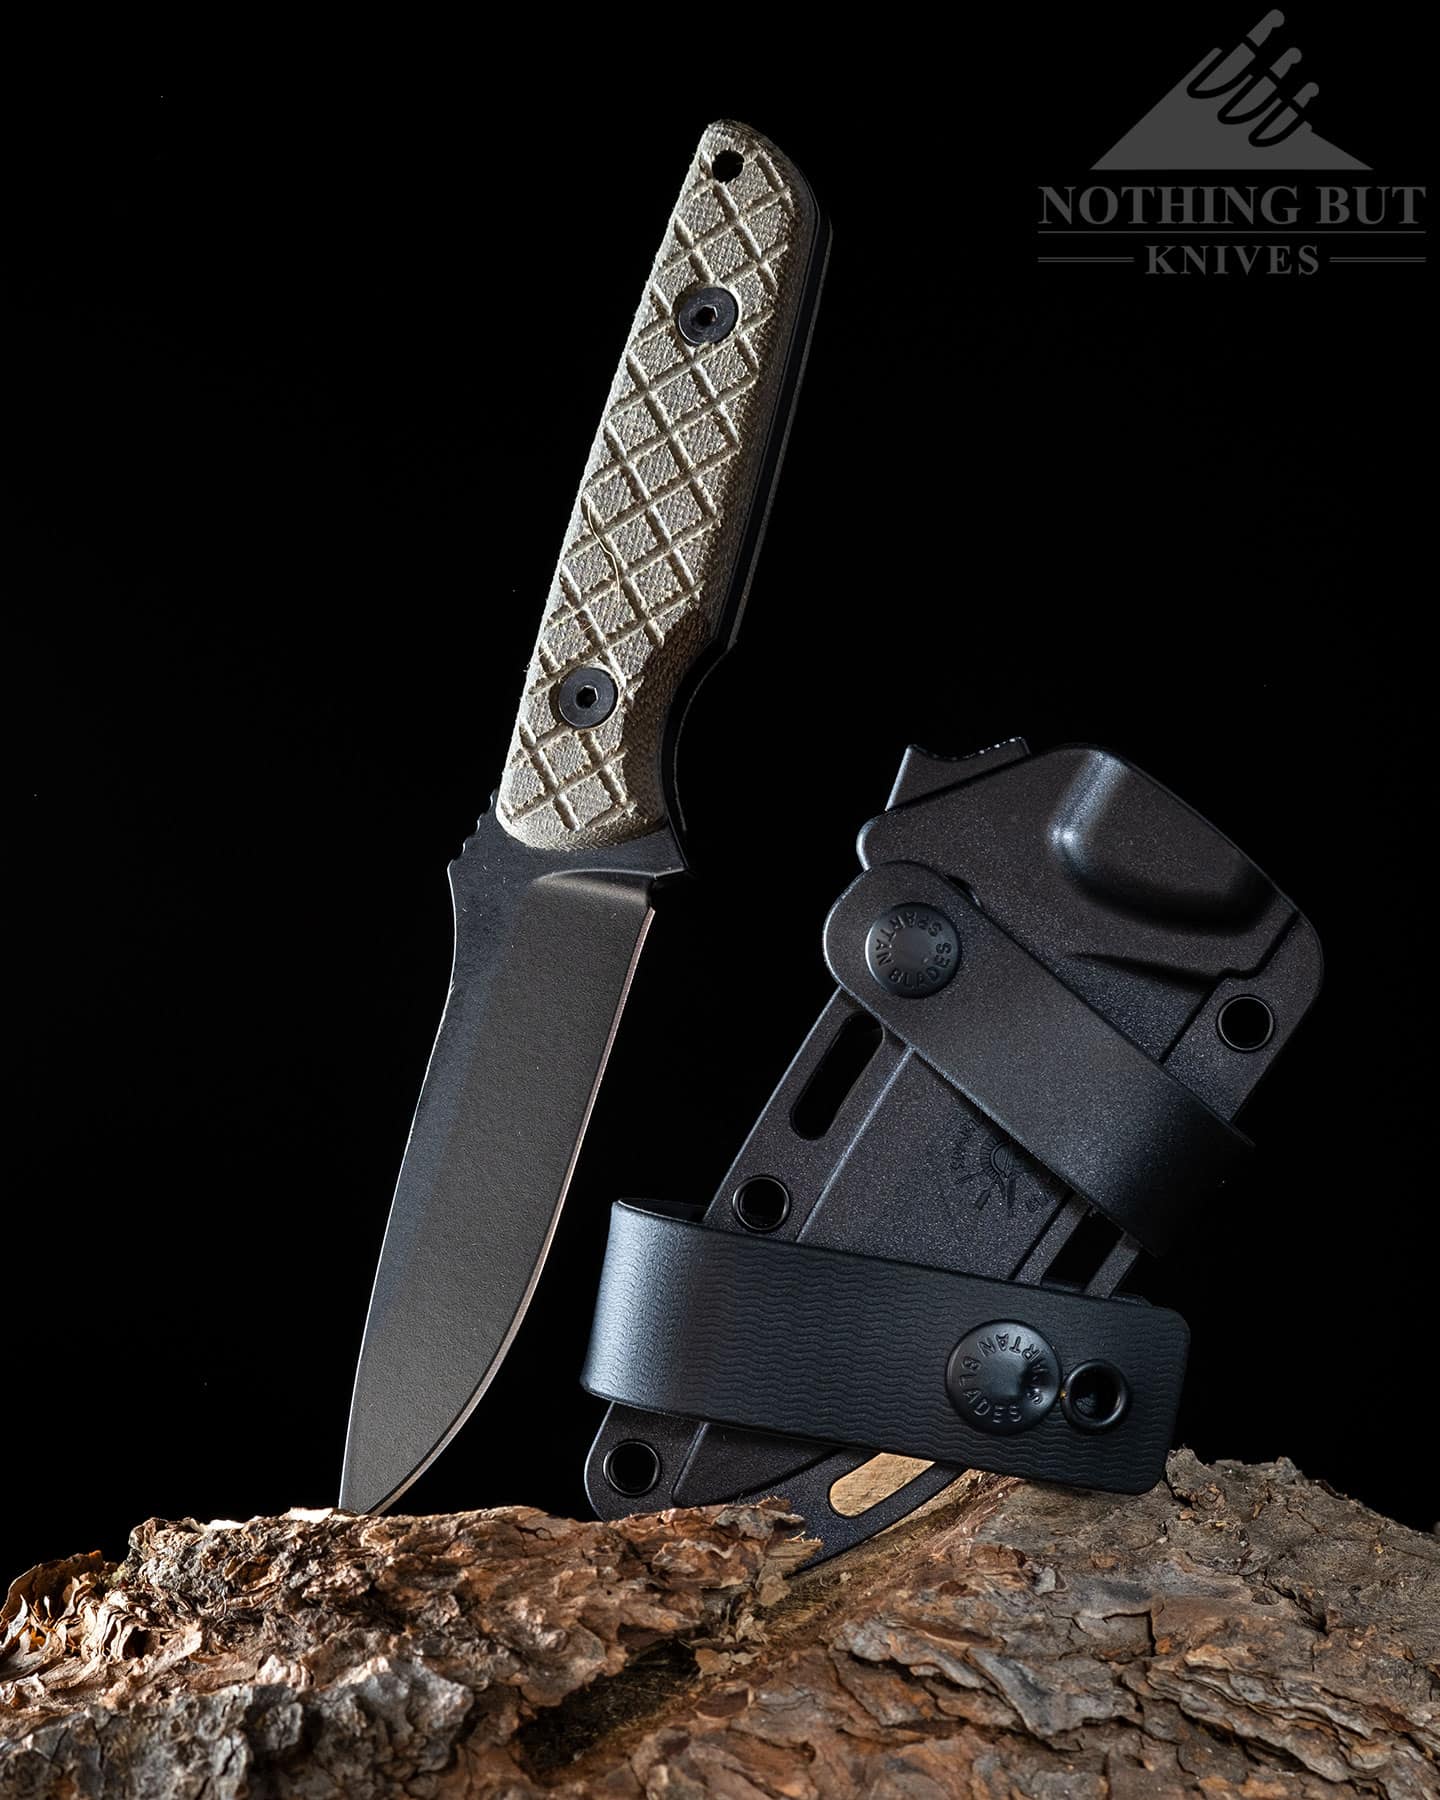 The Spartan Alala with its kydex sheath to show the compact size of the sheath.